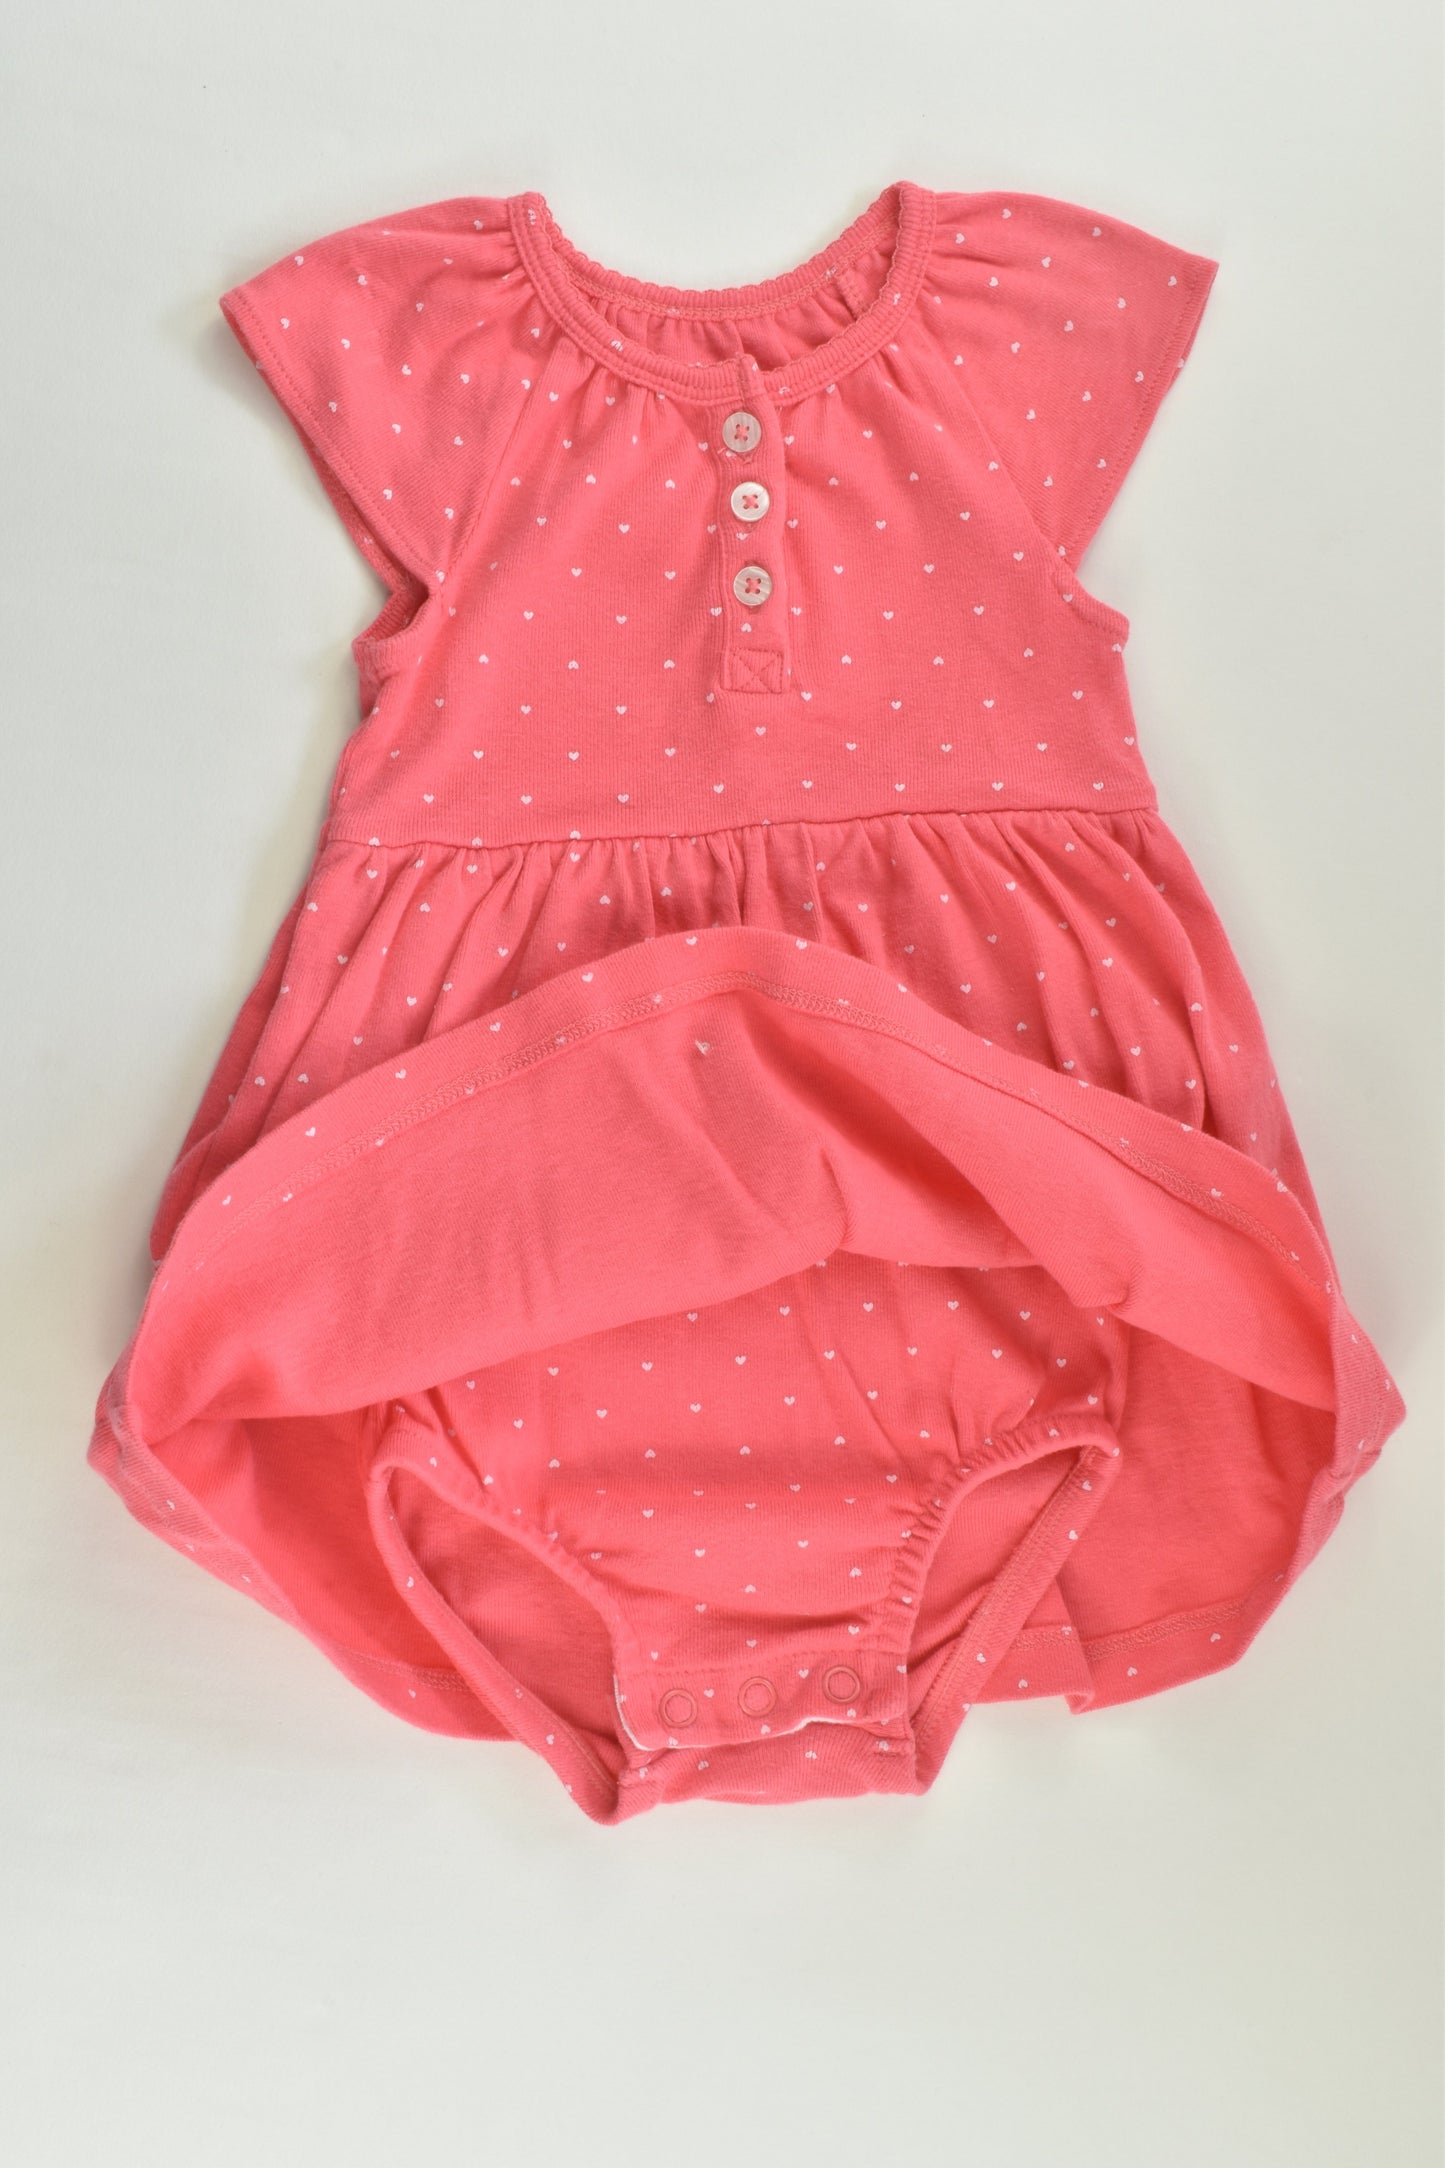 Carter's Size 0 (9 months) Love Hearts Dress with Bodysuit Underneath